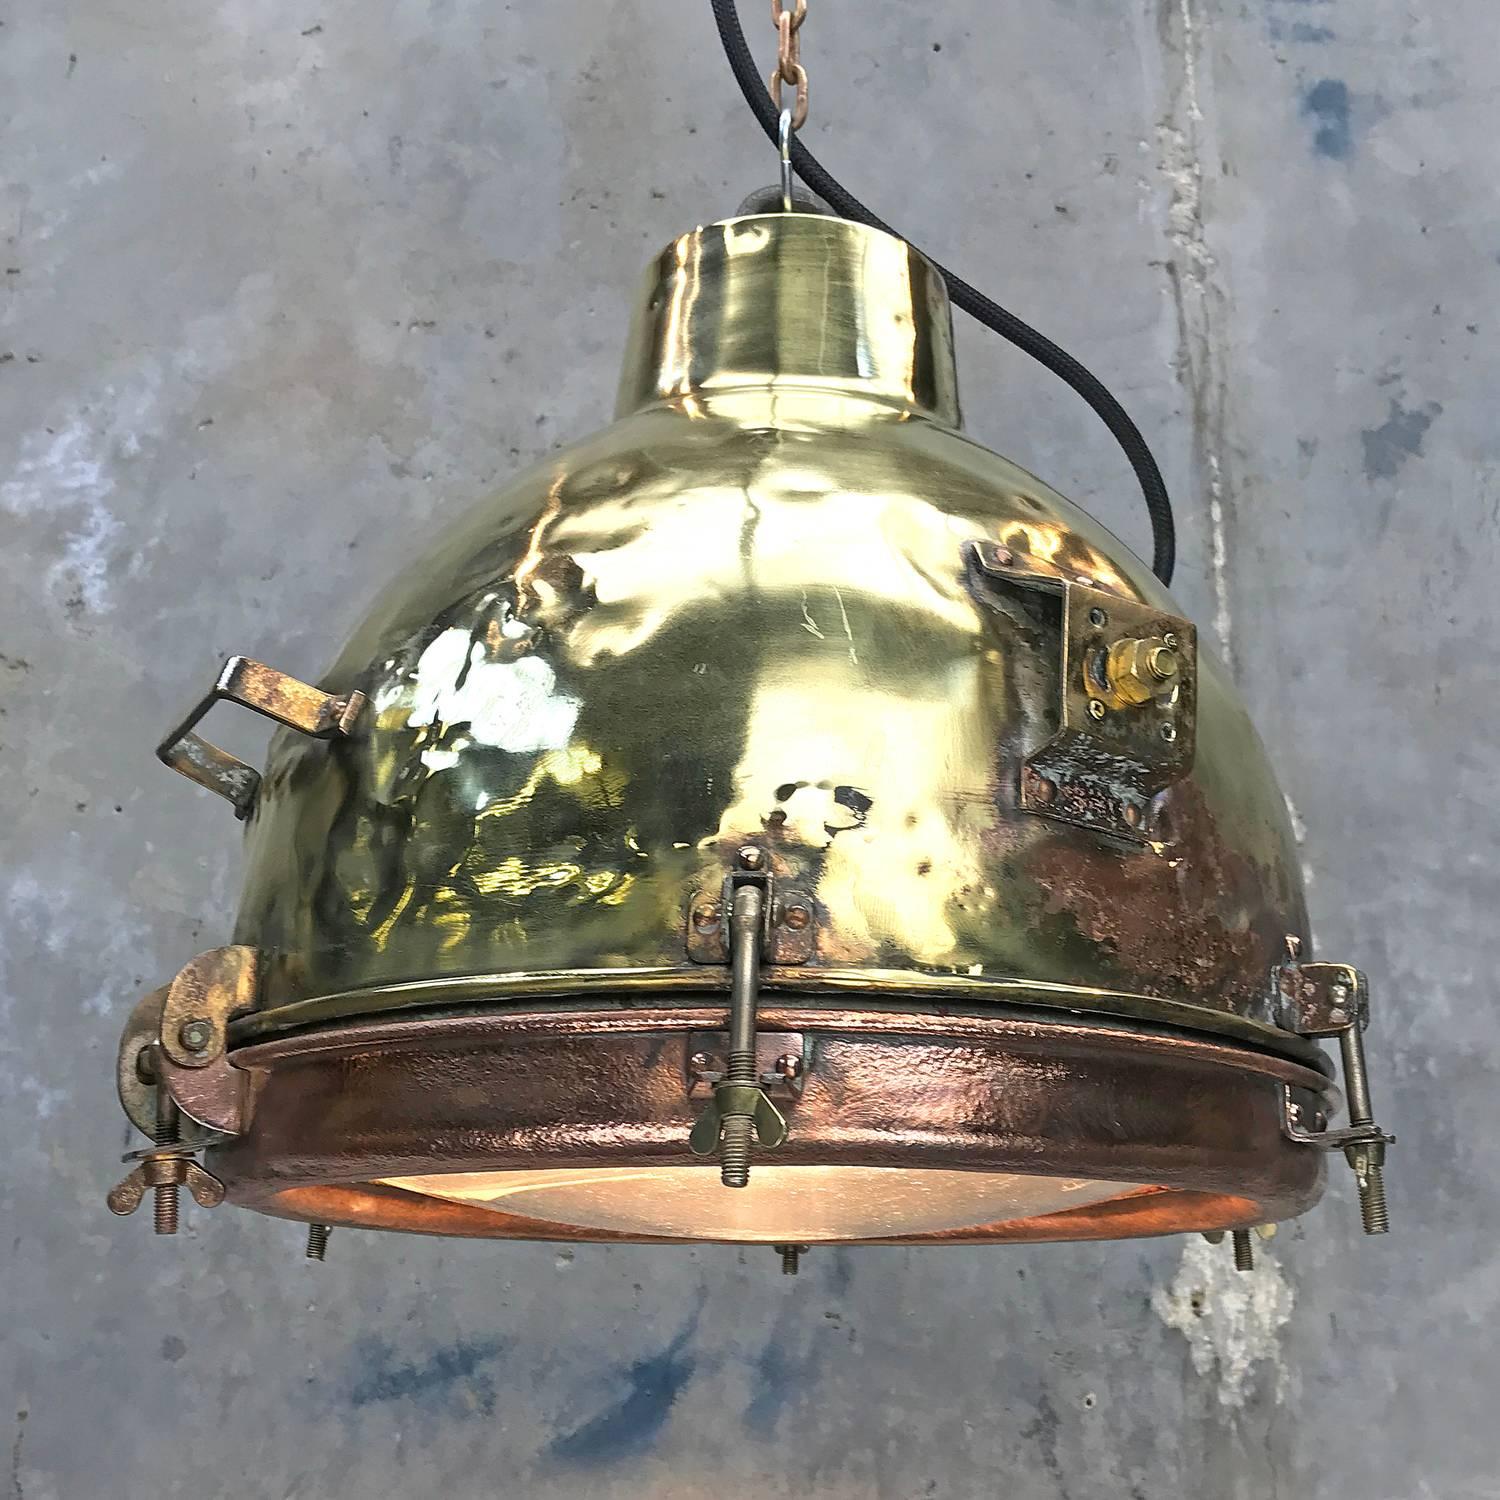 Brass and copper pendant with convex glass, a great design and becoming more rare. These lights were made in the 1960s, the ships from this period are fast disappearing.

The patina shows a good life on the high seas where they would have been